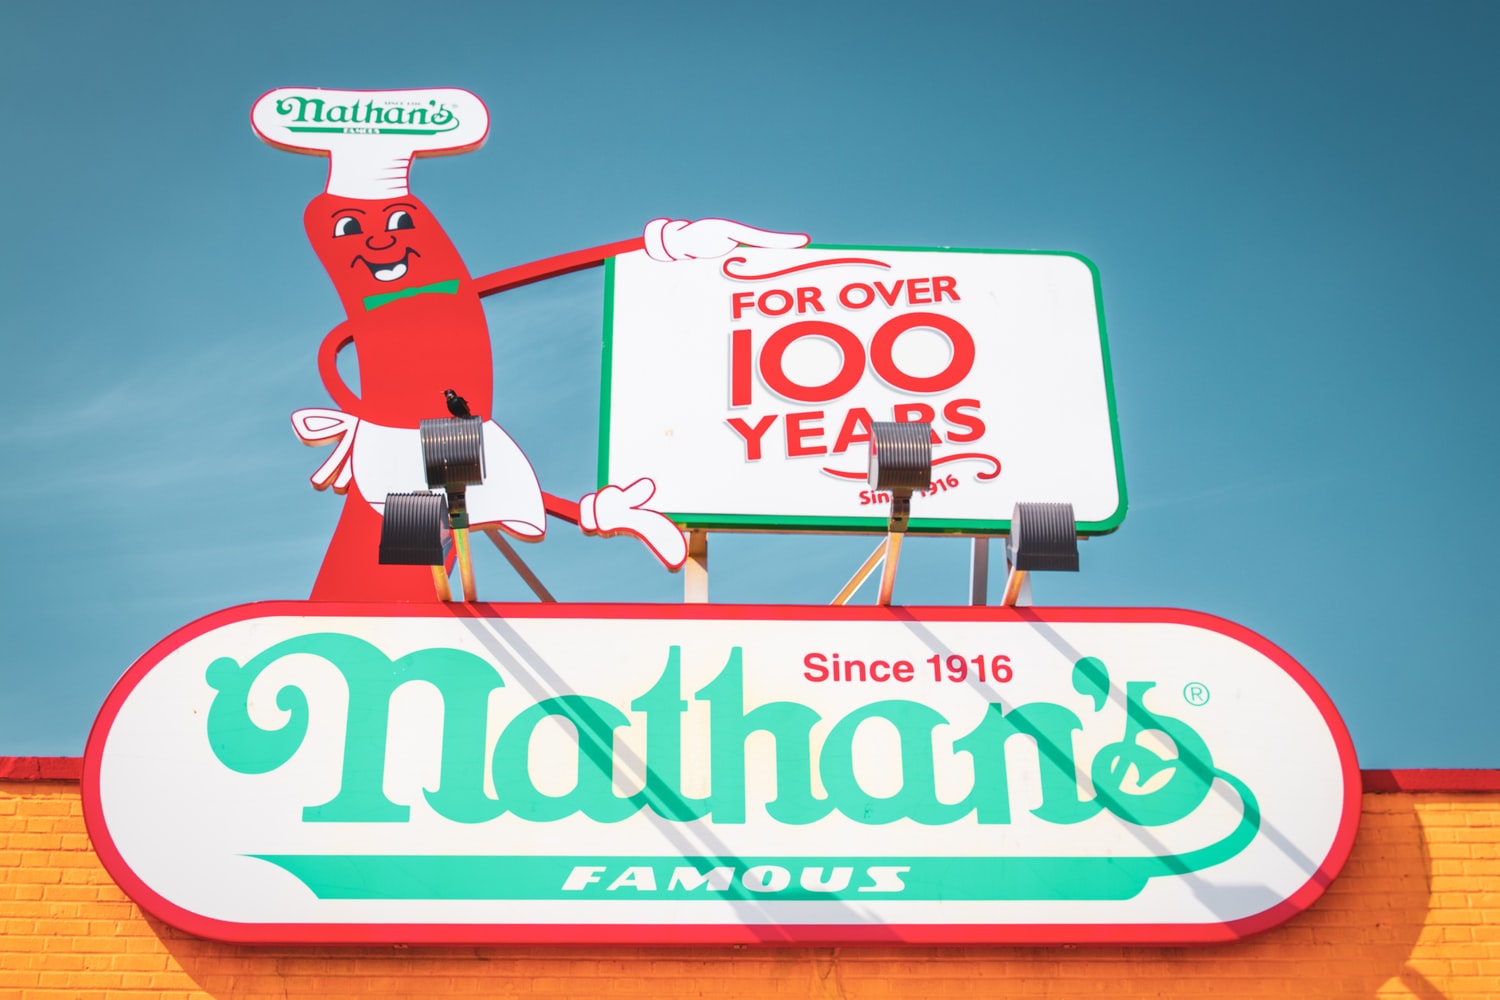 Exterior Storefront Sign for Nathan's in Wilmington